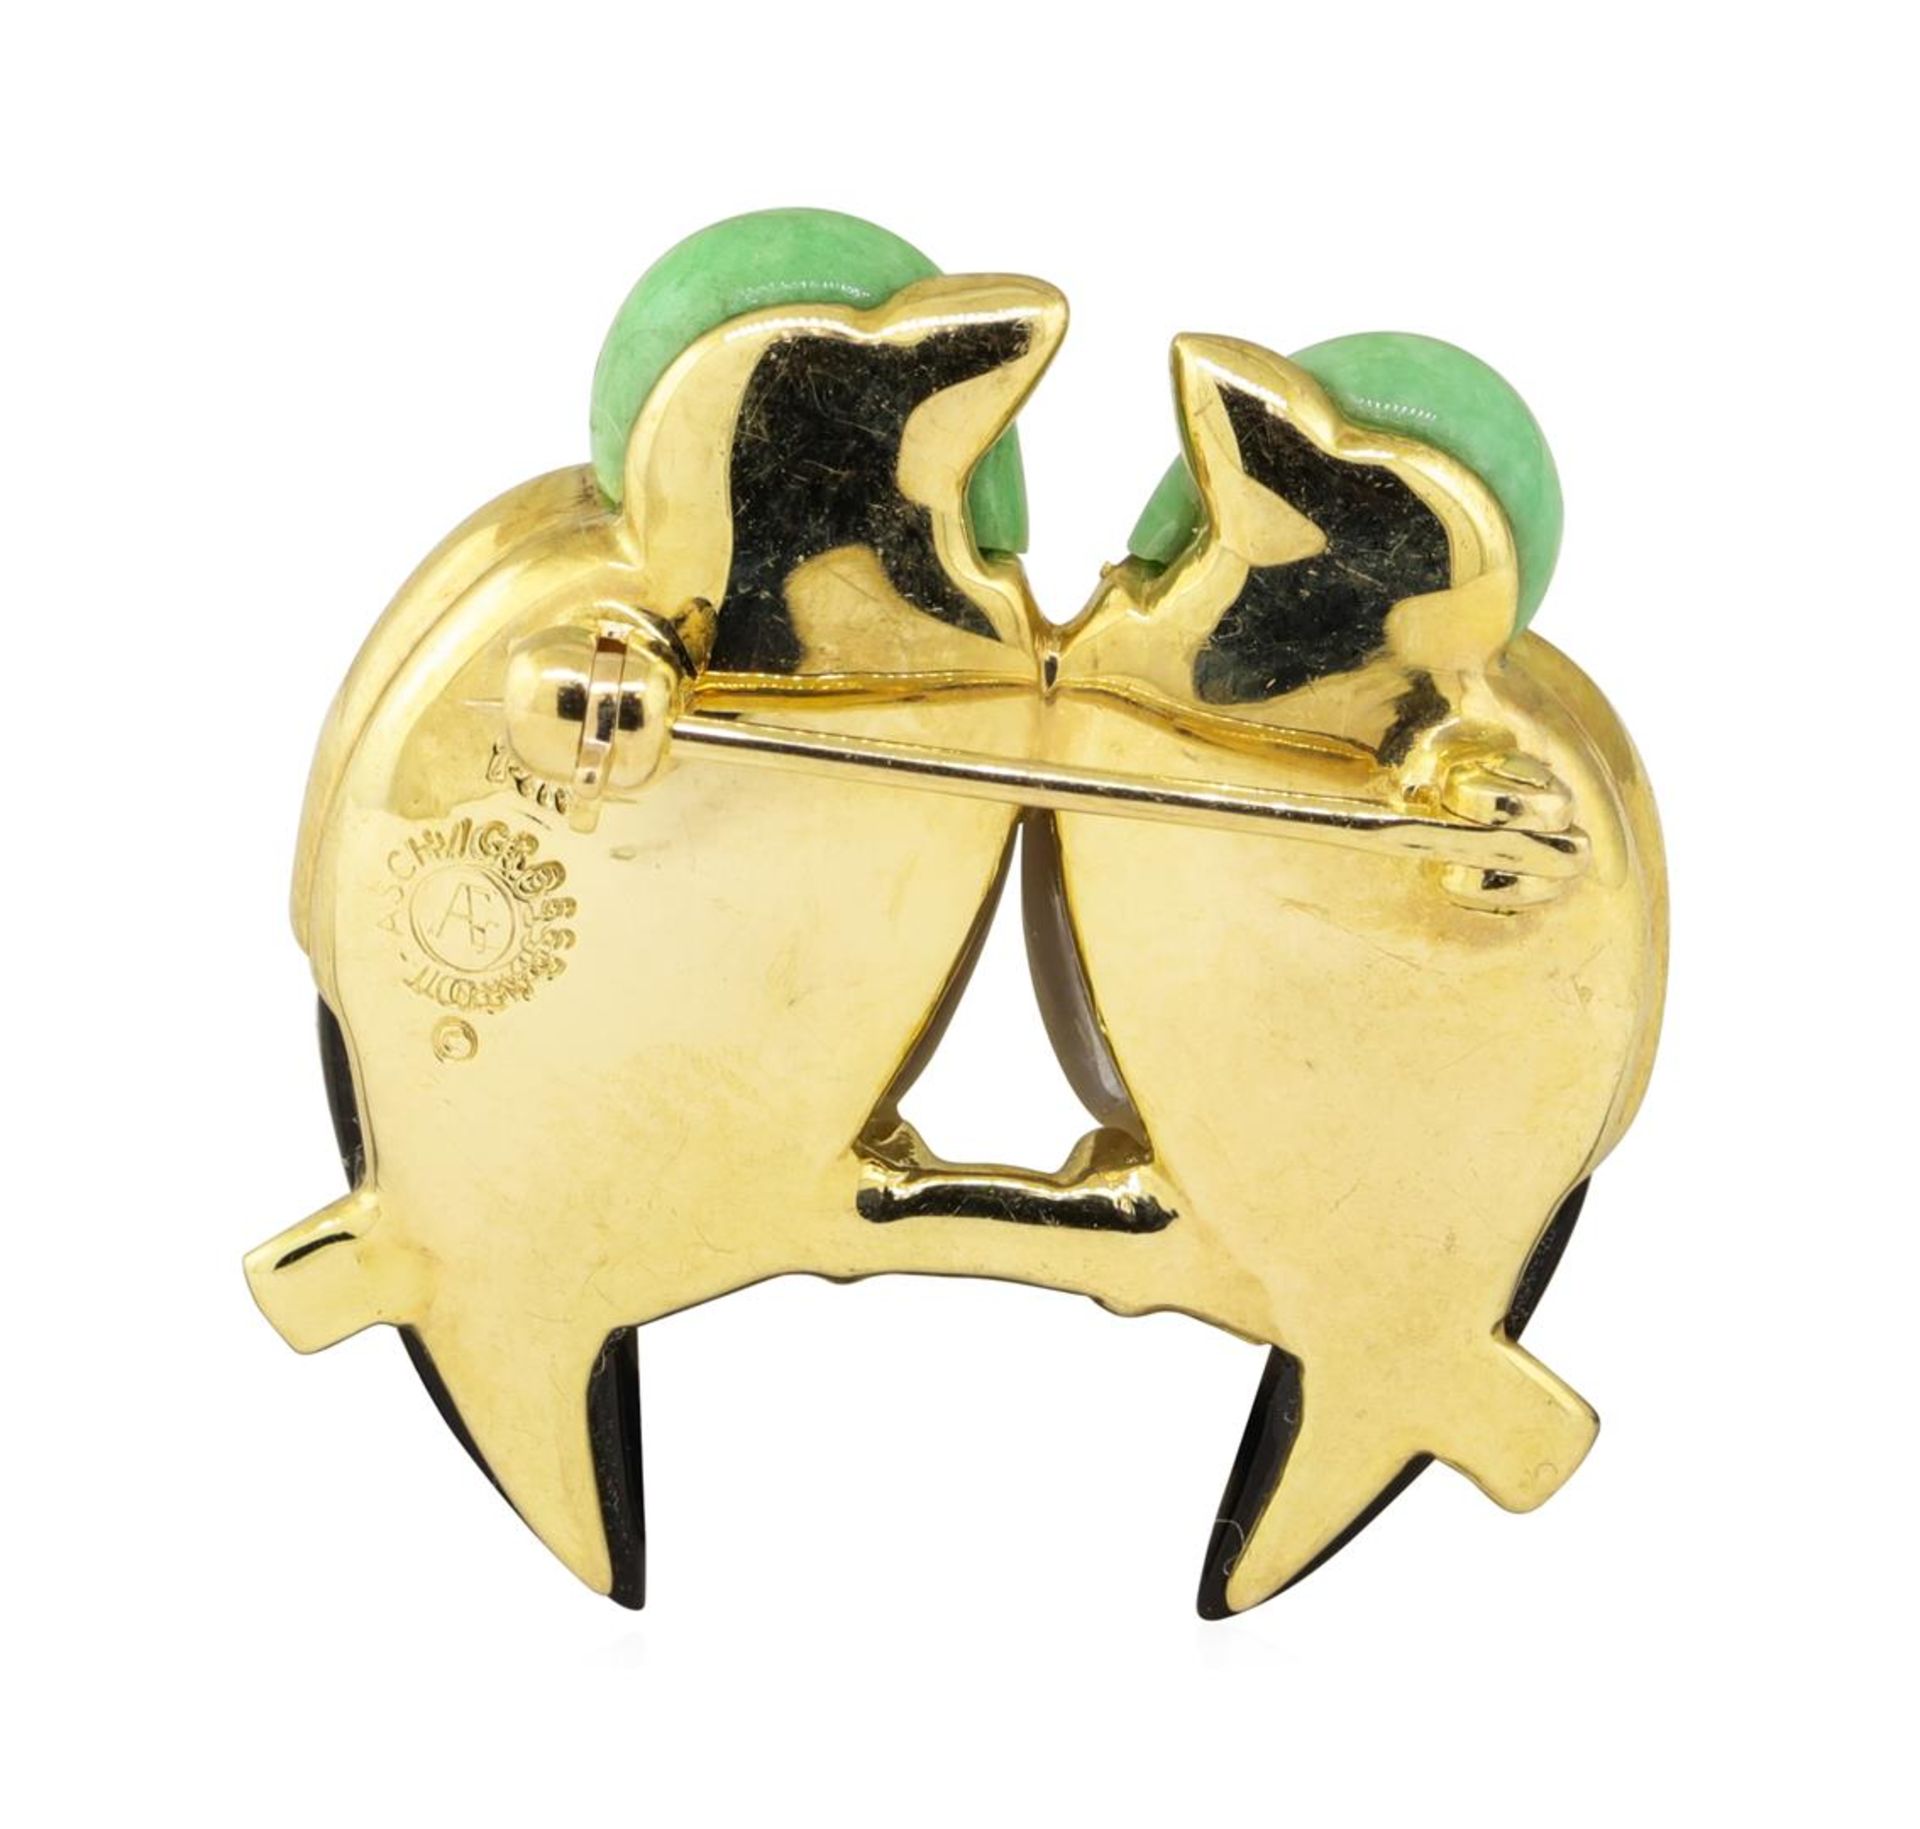 0.12 ctw Diamond and Multi-Colored Gemstone Lovebird Pin - 14KT Yellow Gold - Image 3 of 4